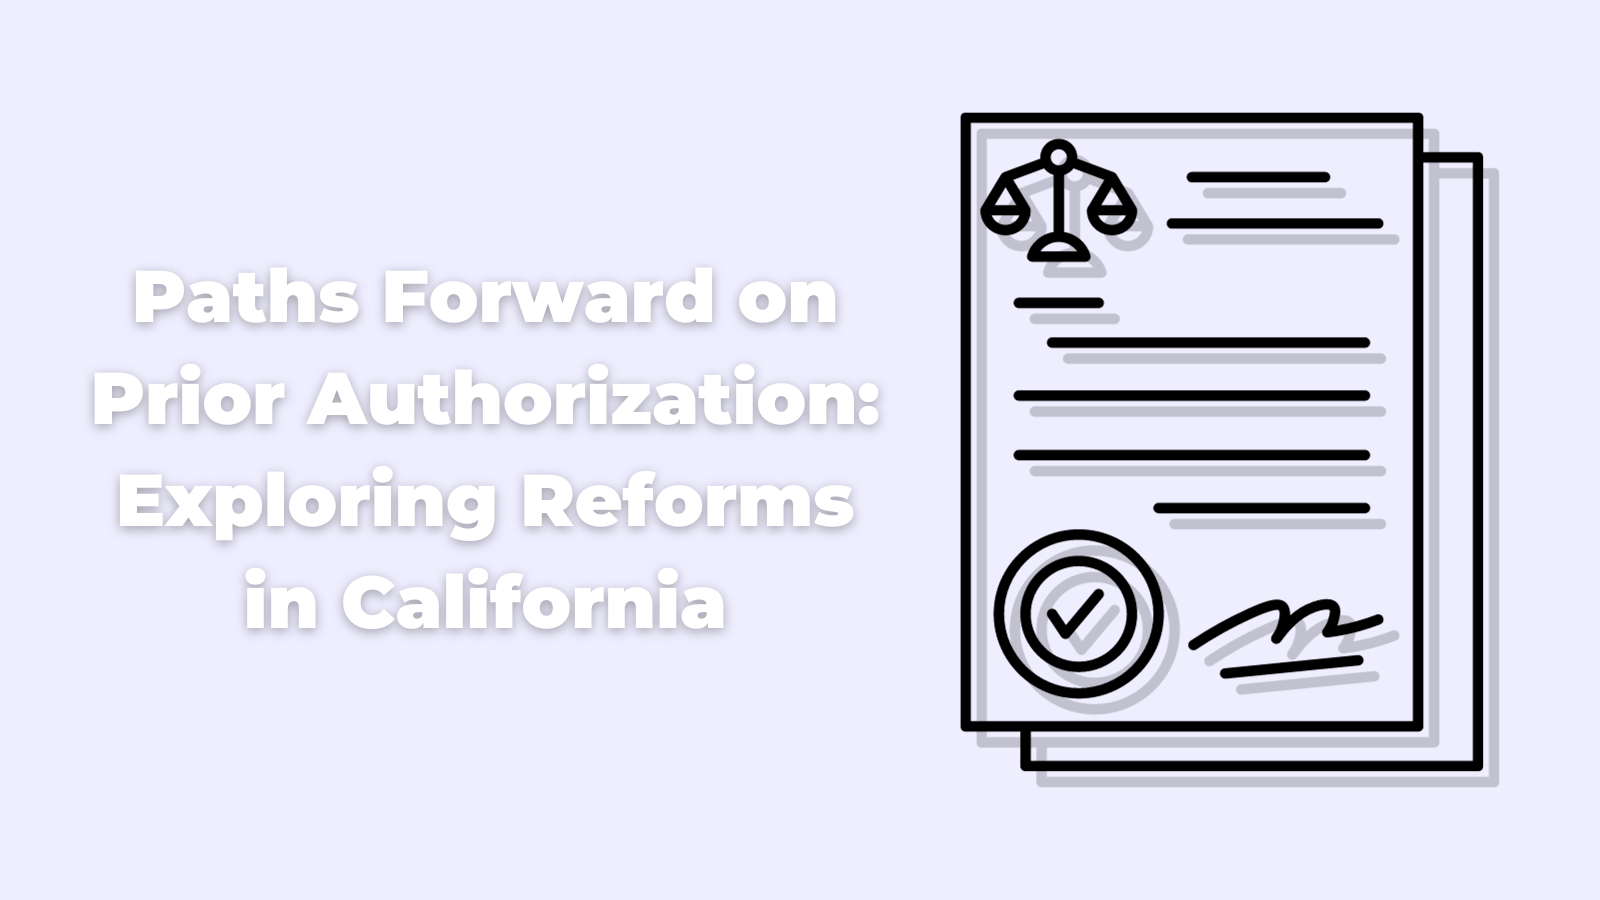 Paths Forward on Prior Authorization: Exploring Reforms in California